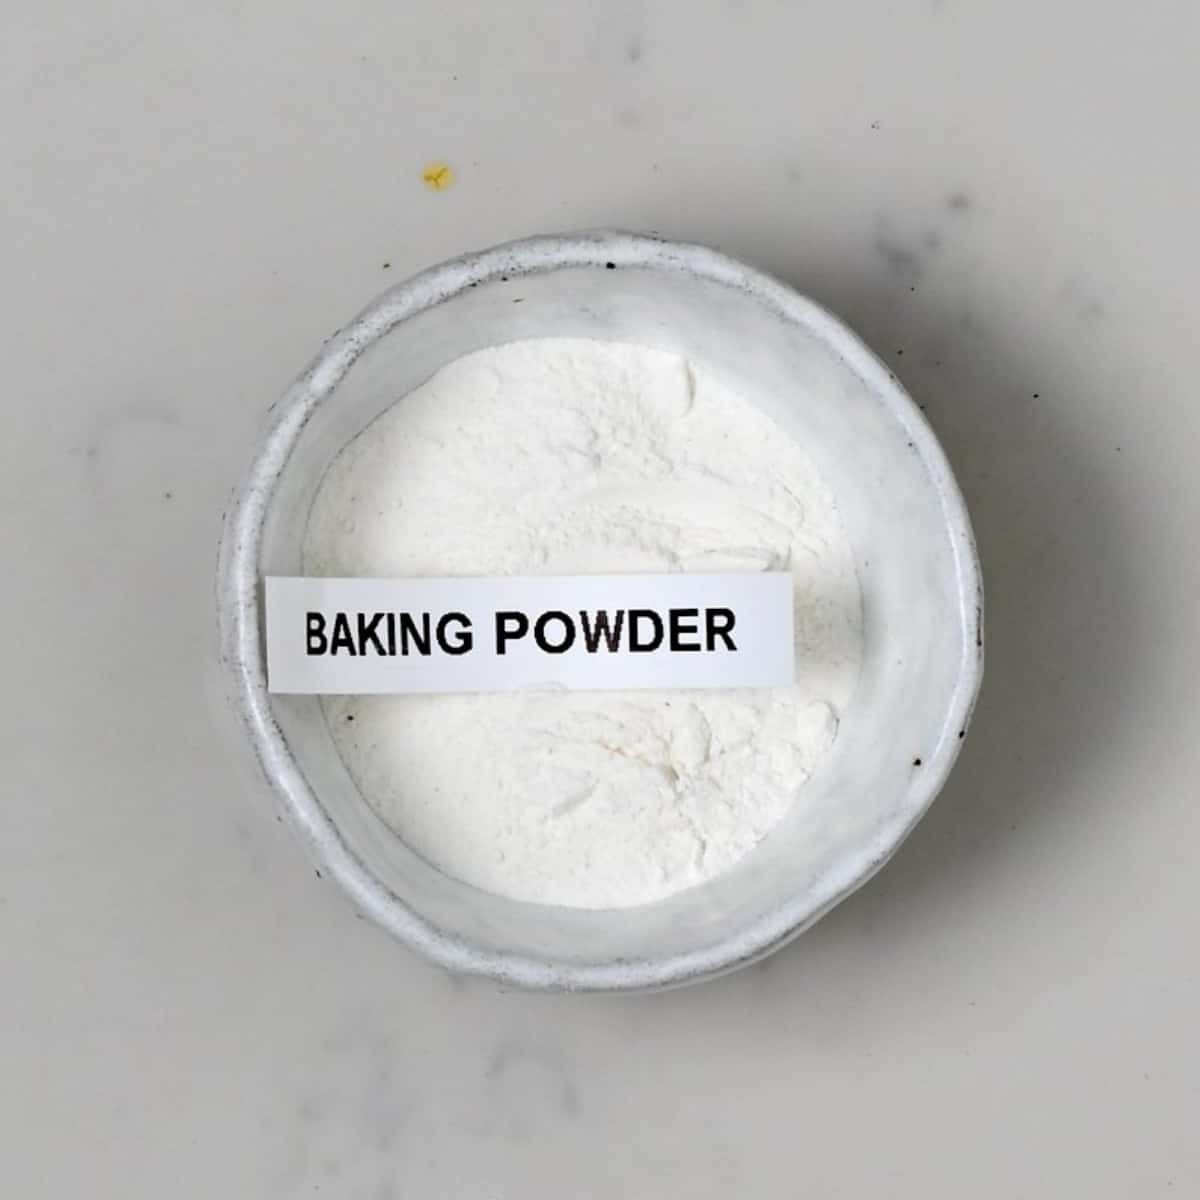 How to Make Baking Powder - Alphafoodie